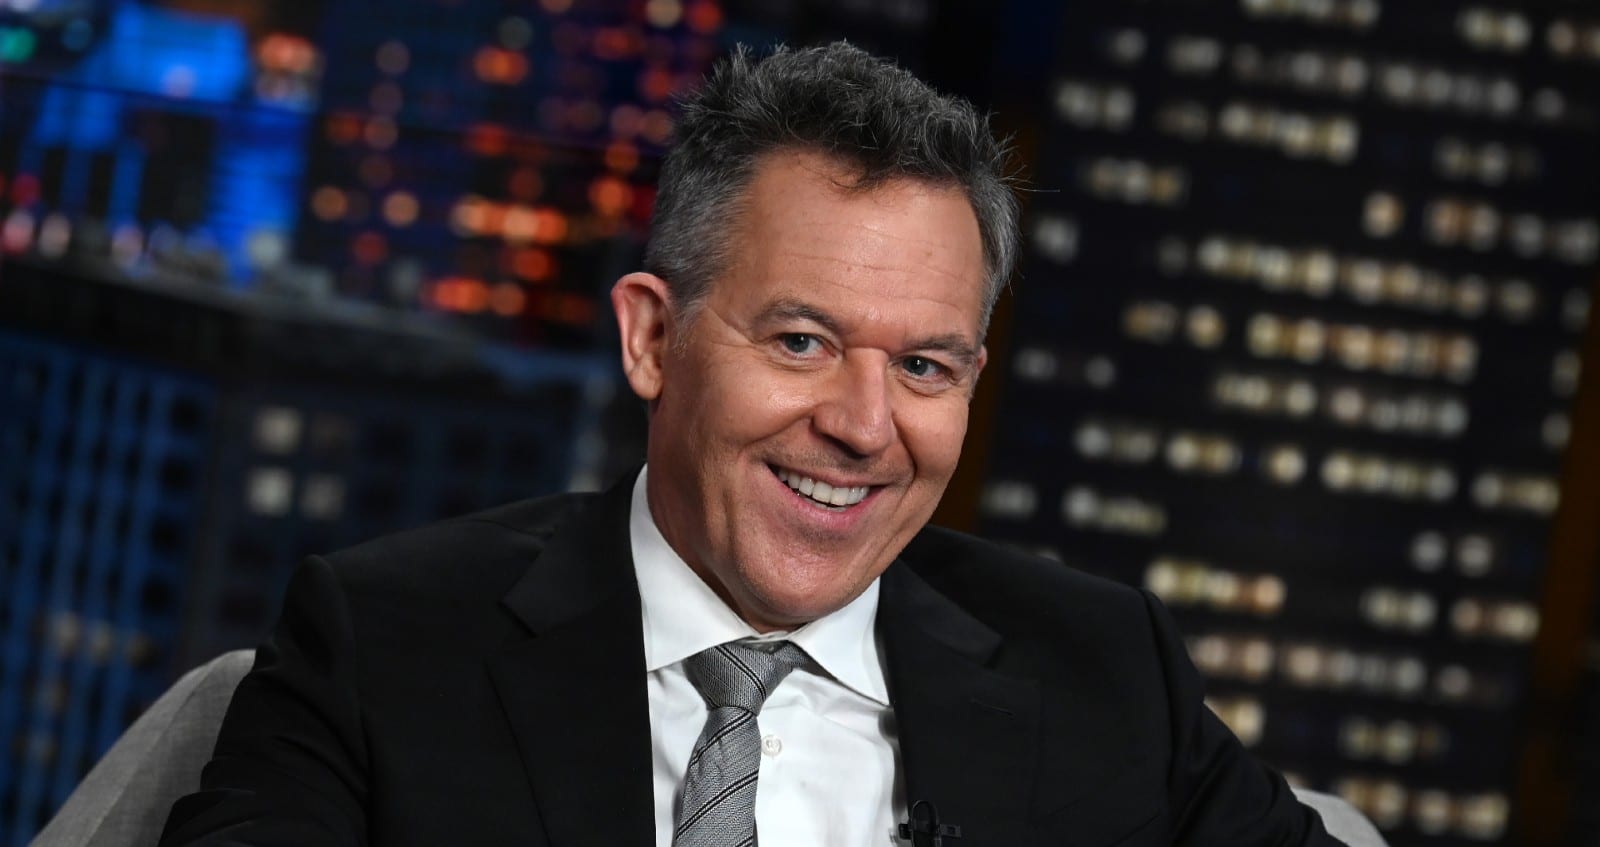 Popular Fox News Host Greg Gutfeld Shares Massive News with Fans, He May Leave 'The Five' For New Gig as He's Open To Possibly Taking Tucker's Old Slot: Report